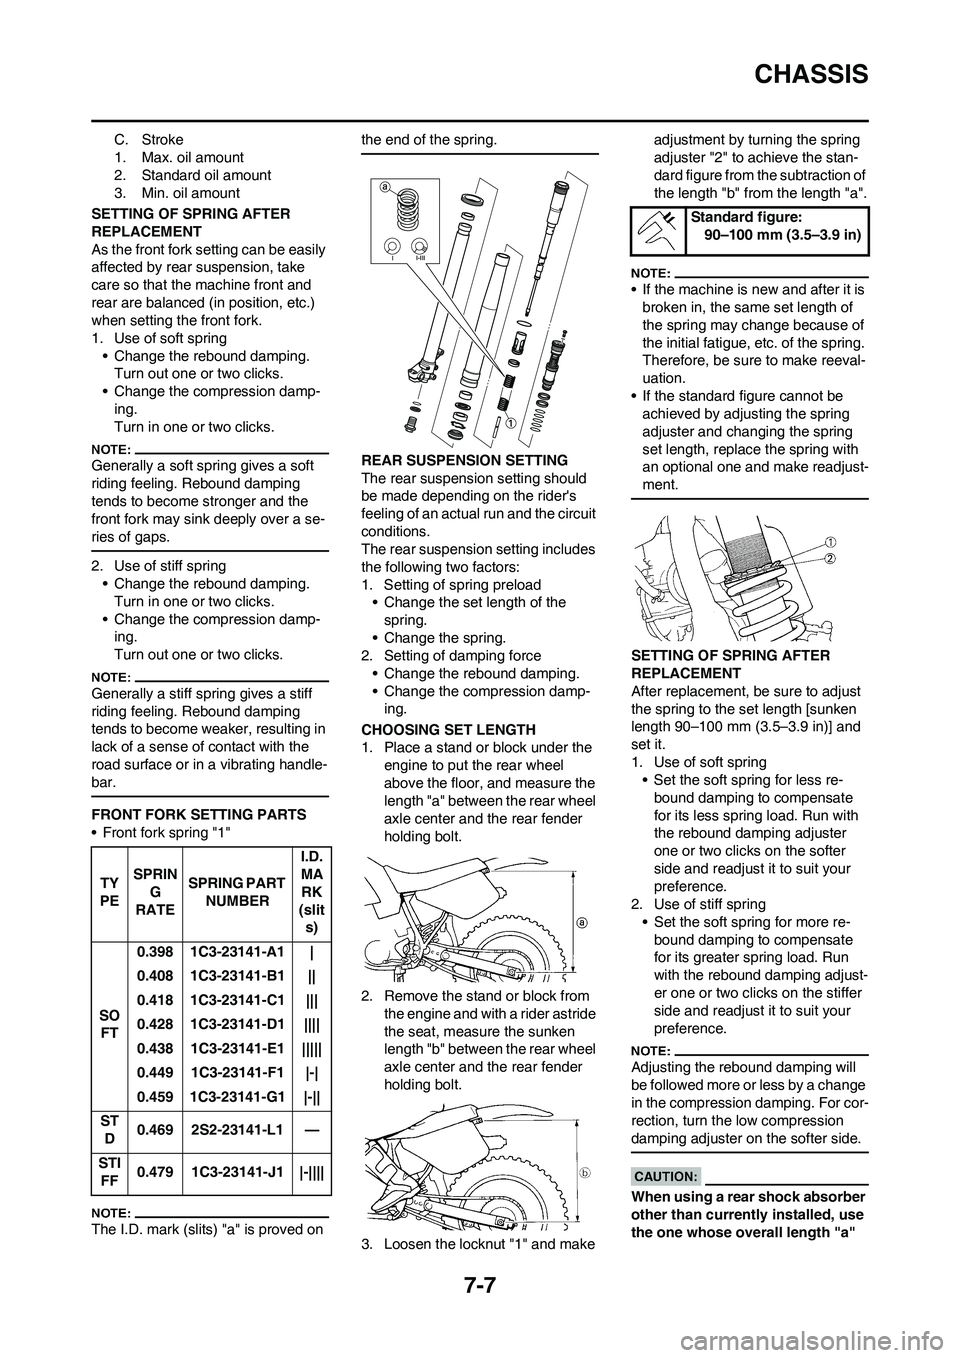 YAMAHA YZ450F 2008 User Guide 7-7
CHASSIS
C. Stroke
1. Max. oil amount
2. Standard oil amount
3. Min. oil amount
SETTING OF SPRING AFTER 
REPLACEMENT
As the front fork setting can be easily 
affected by rear suspension, take 
care